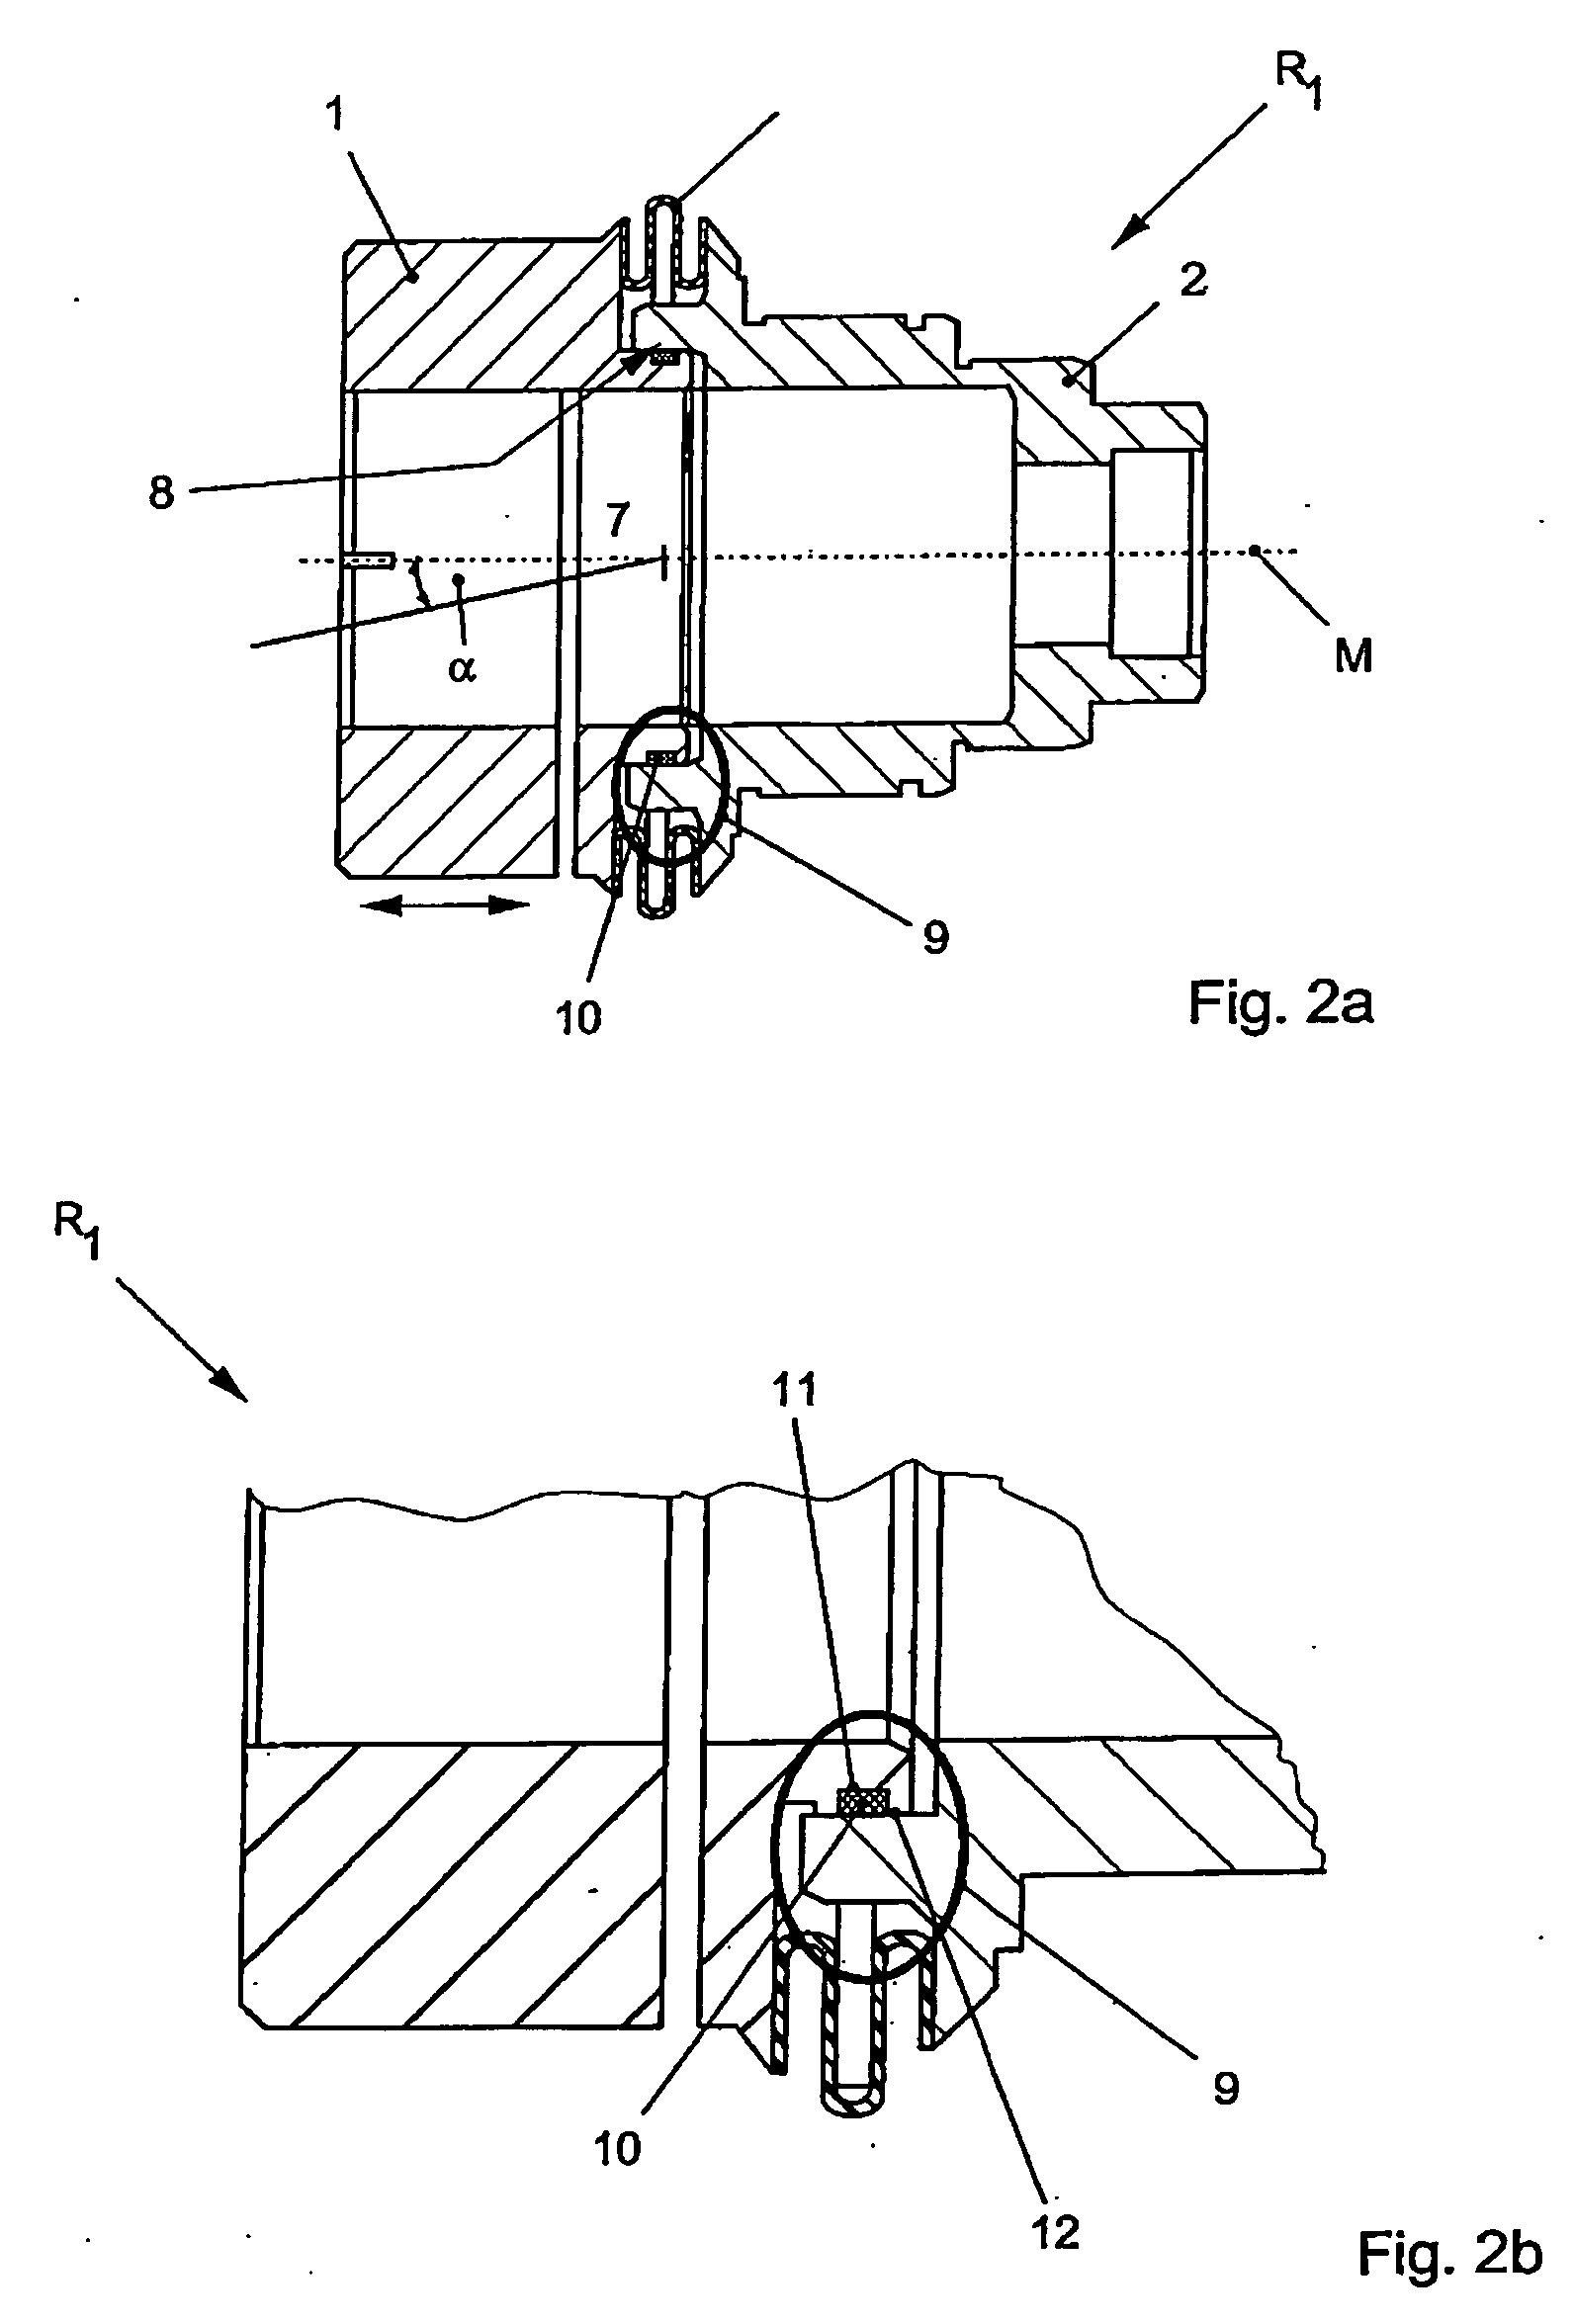 Coupling for connecting two components